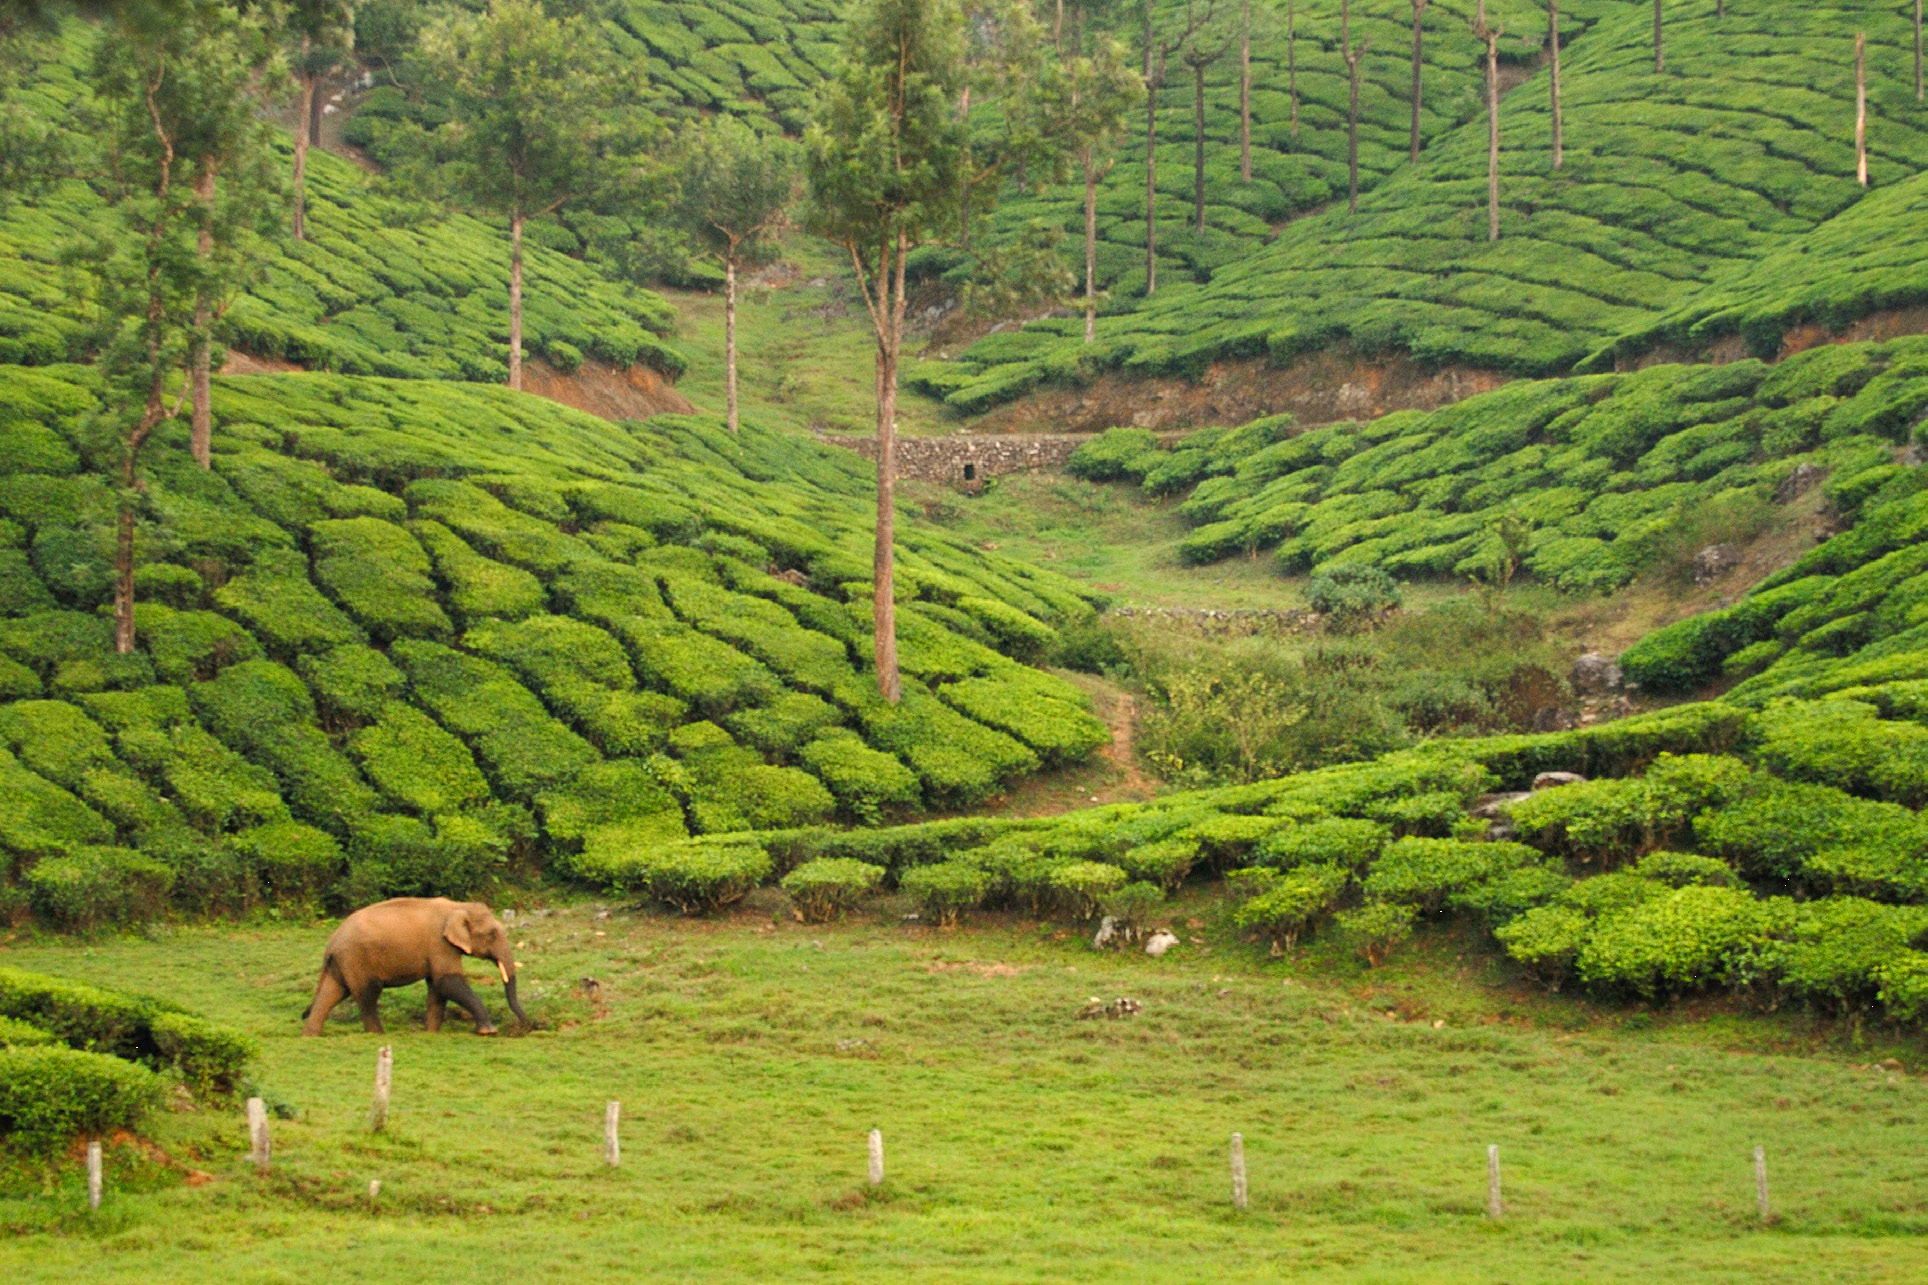 An Asian elephant passes through a tea plantation (cultural vegetation) in the Valparai plateau in Anamalai Hills of the western Ghats, India, on its way from one natural forest patch to another. Classifying the type of cultural vegetation is important to the overall assessment of elephant habitat, because, although the elephants are able to use the tea plantations as part of a migratory corridor, they are also likely to run into conflict with humans as they pass through. | Photo by Kalyan Varma